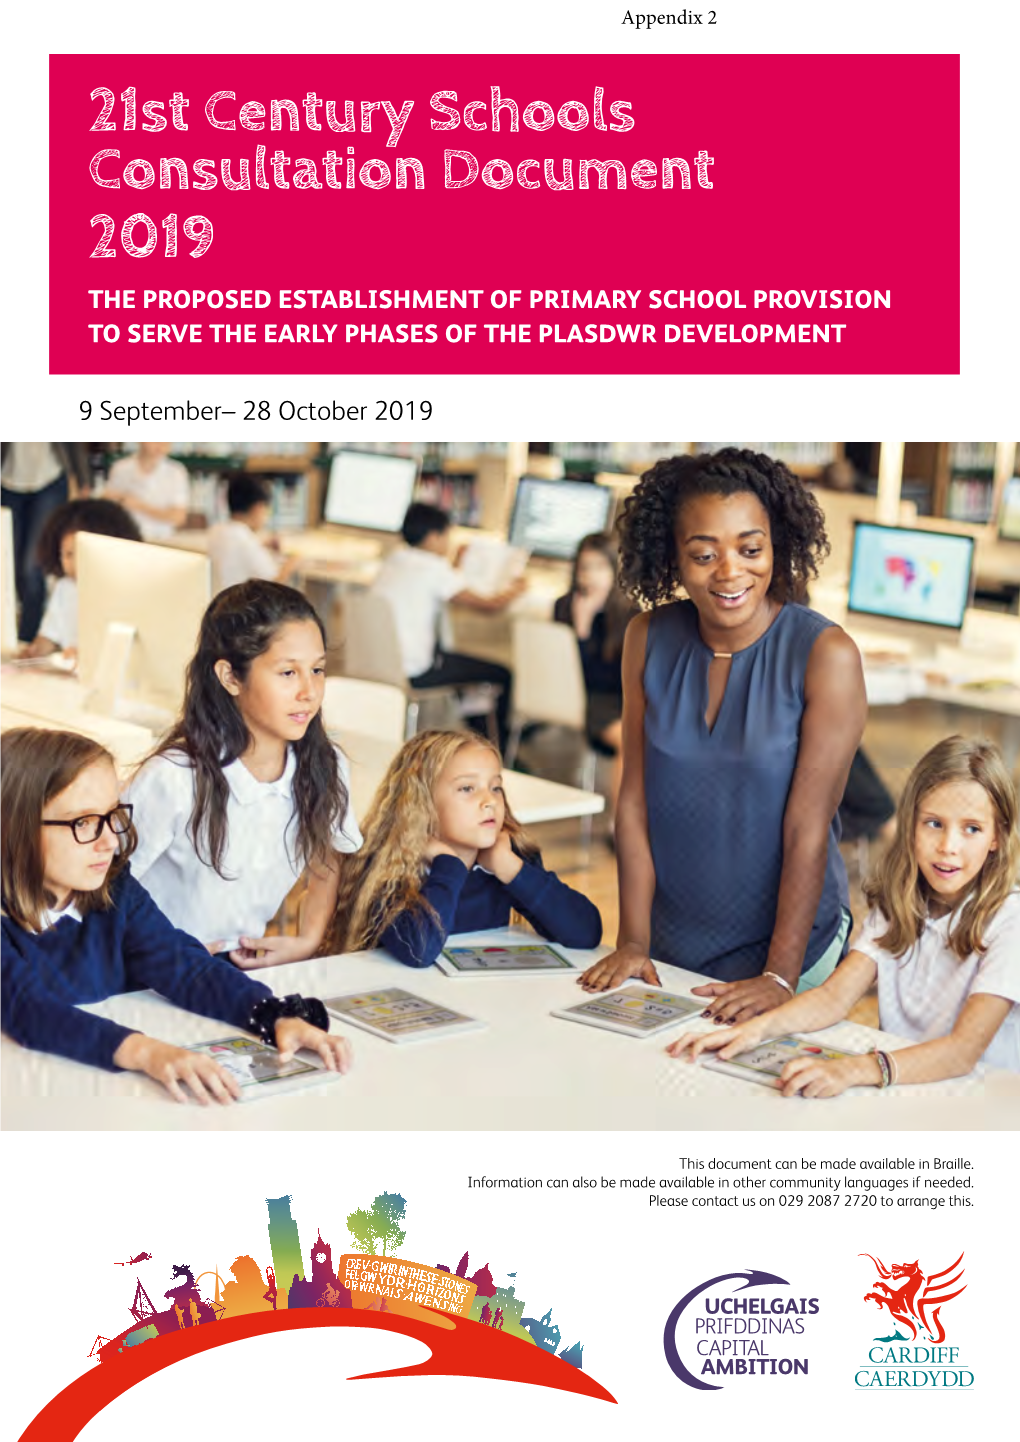 21St Century Schools Consultation Document 2019 the PROPOSED ESTABLISHMENT of PRIMARY SCHOOL PROVISION to SERVE the EARLY PHASES of the PLASDWR DEVELOPMENT